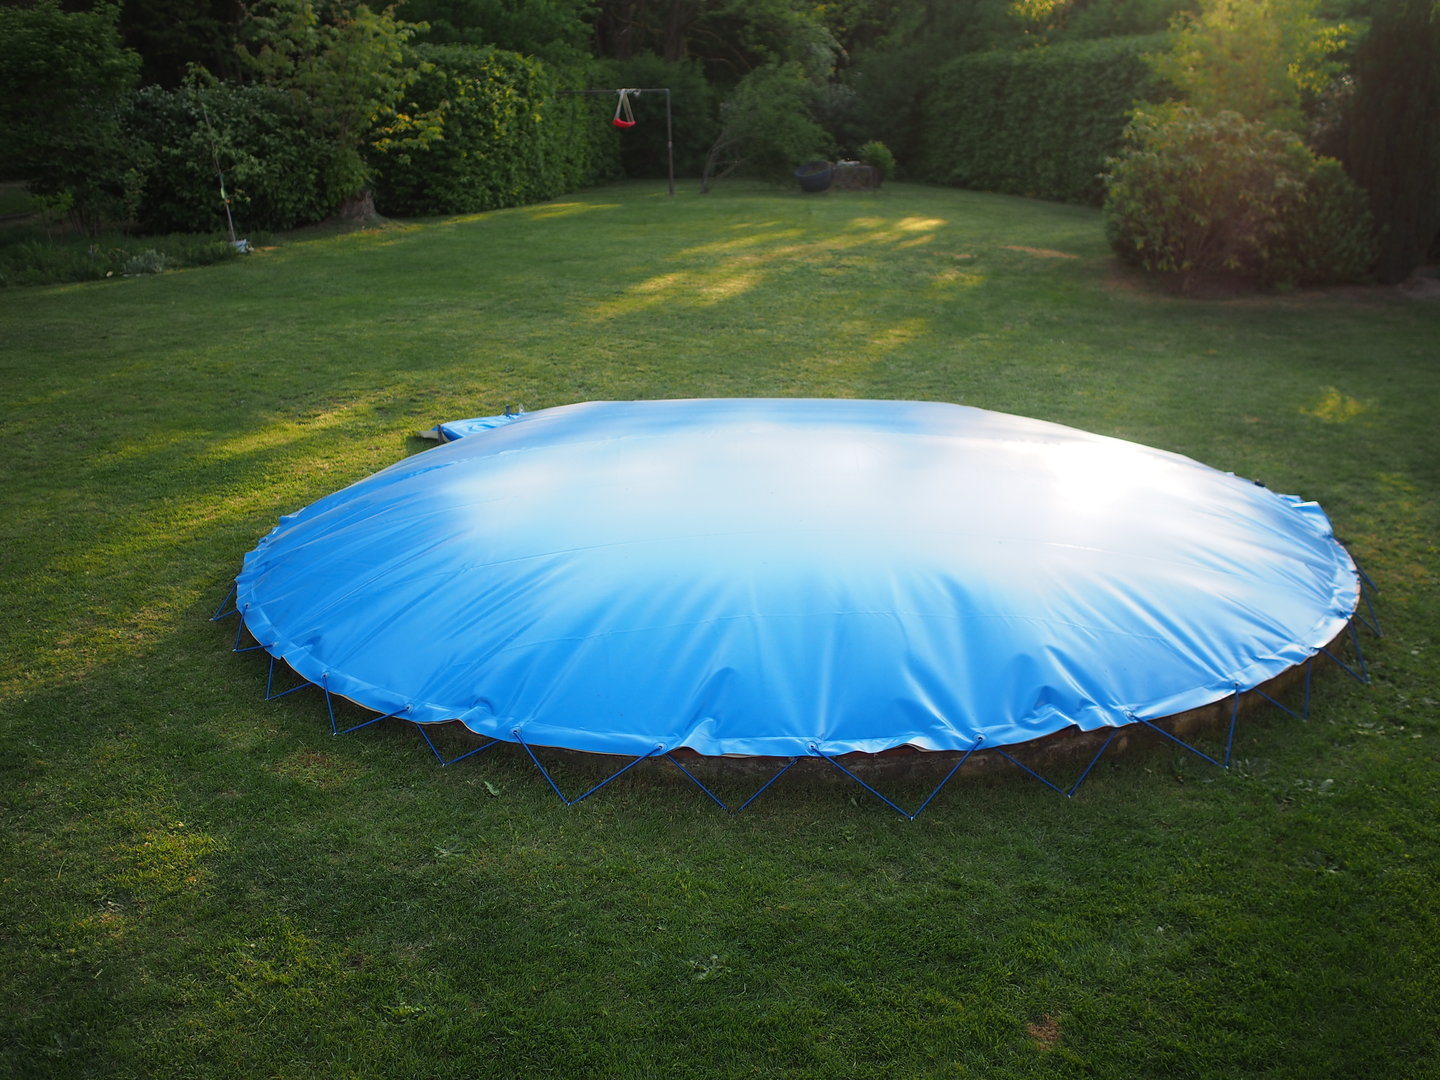 round inflatable pool cover + 20m elastic rope and pump